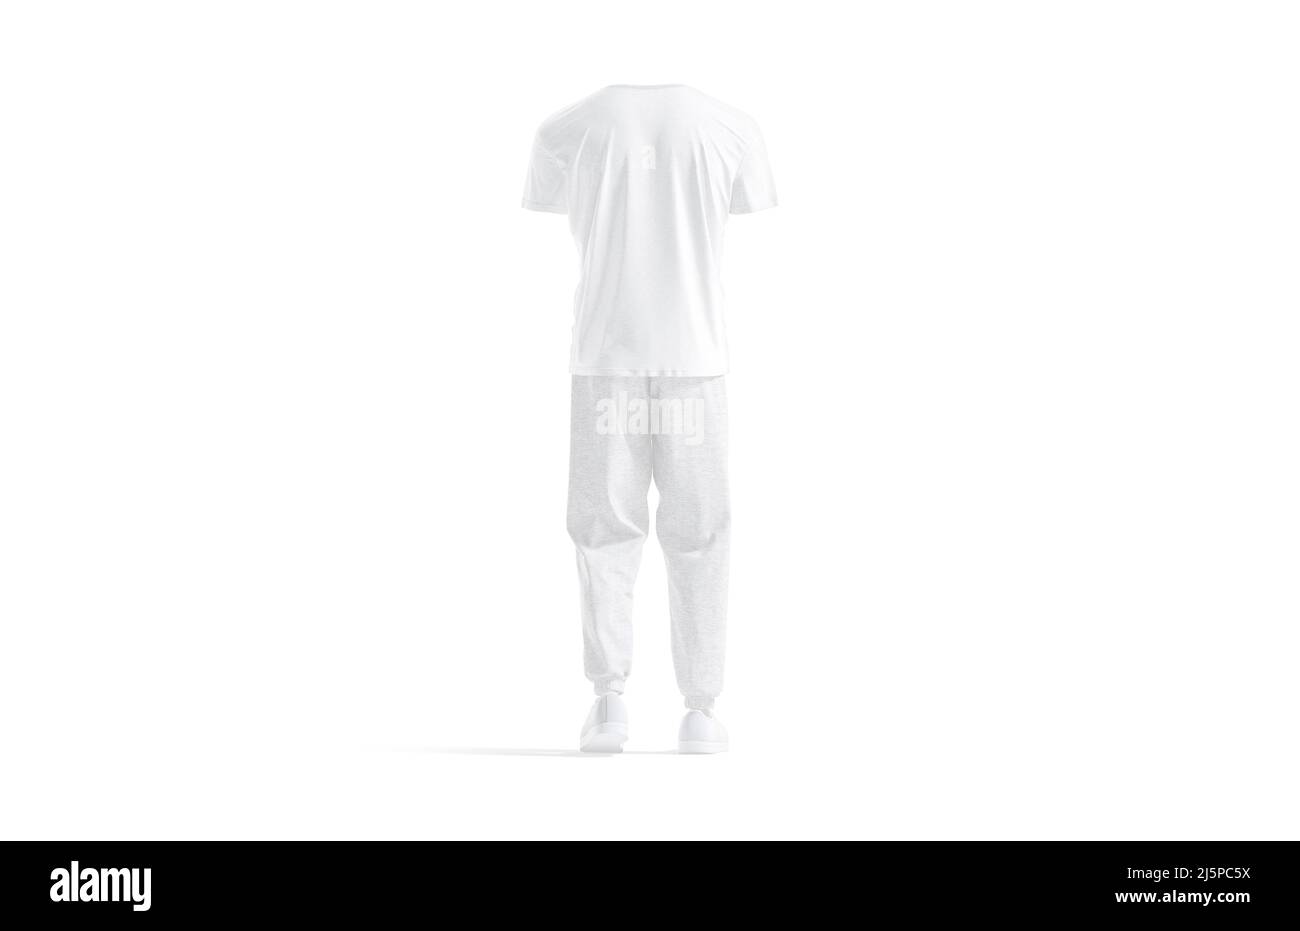 Blank white sport uniform with t-shirt and sweatpants mockup, isolated Stock Photo